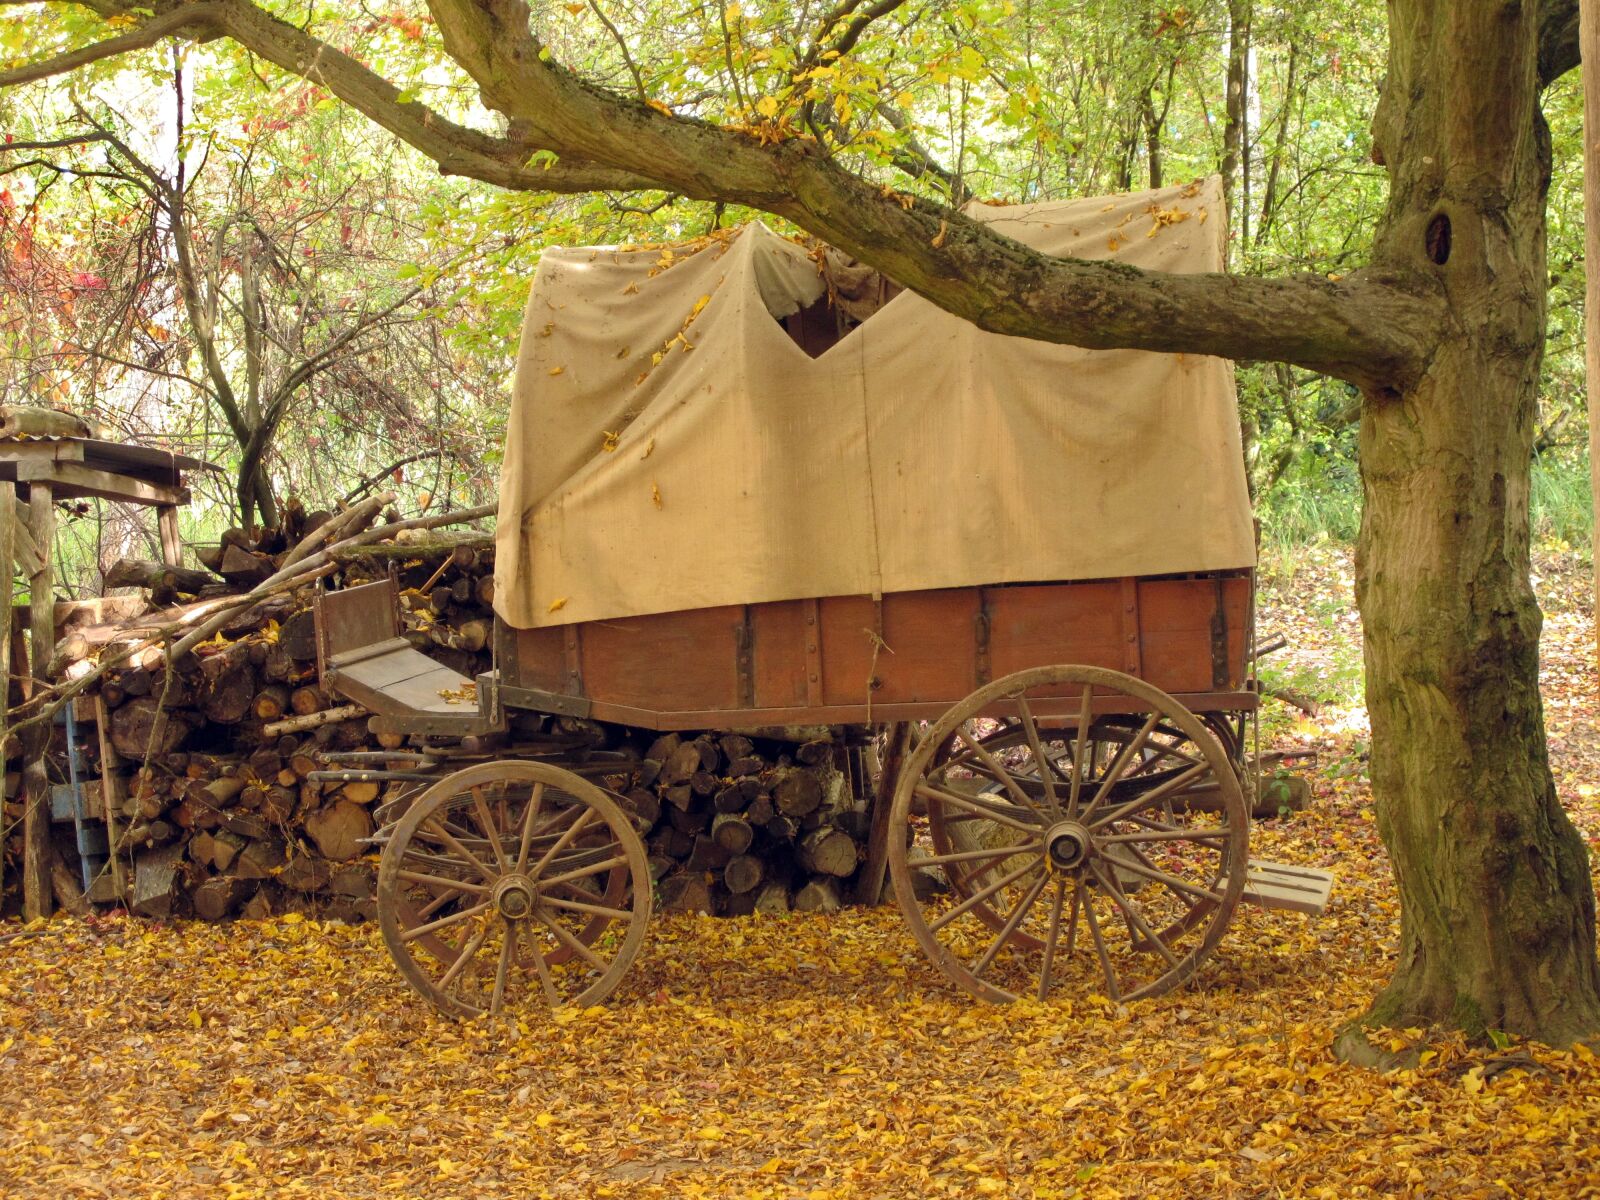 Canon PowerShot SD780 IS (Digital IXUS 100 IS / IXY Digital 210 IS) sample photo. Covered wagon, wooden cart photography